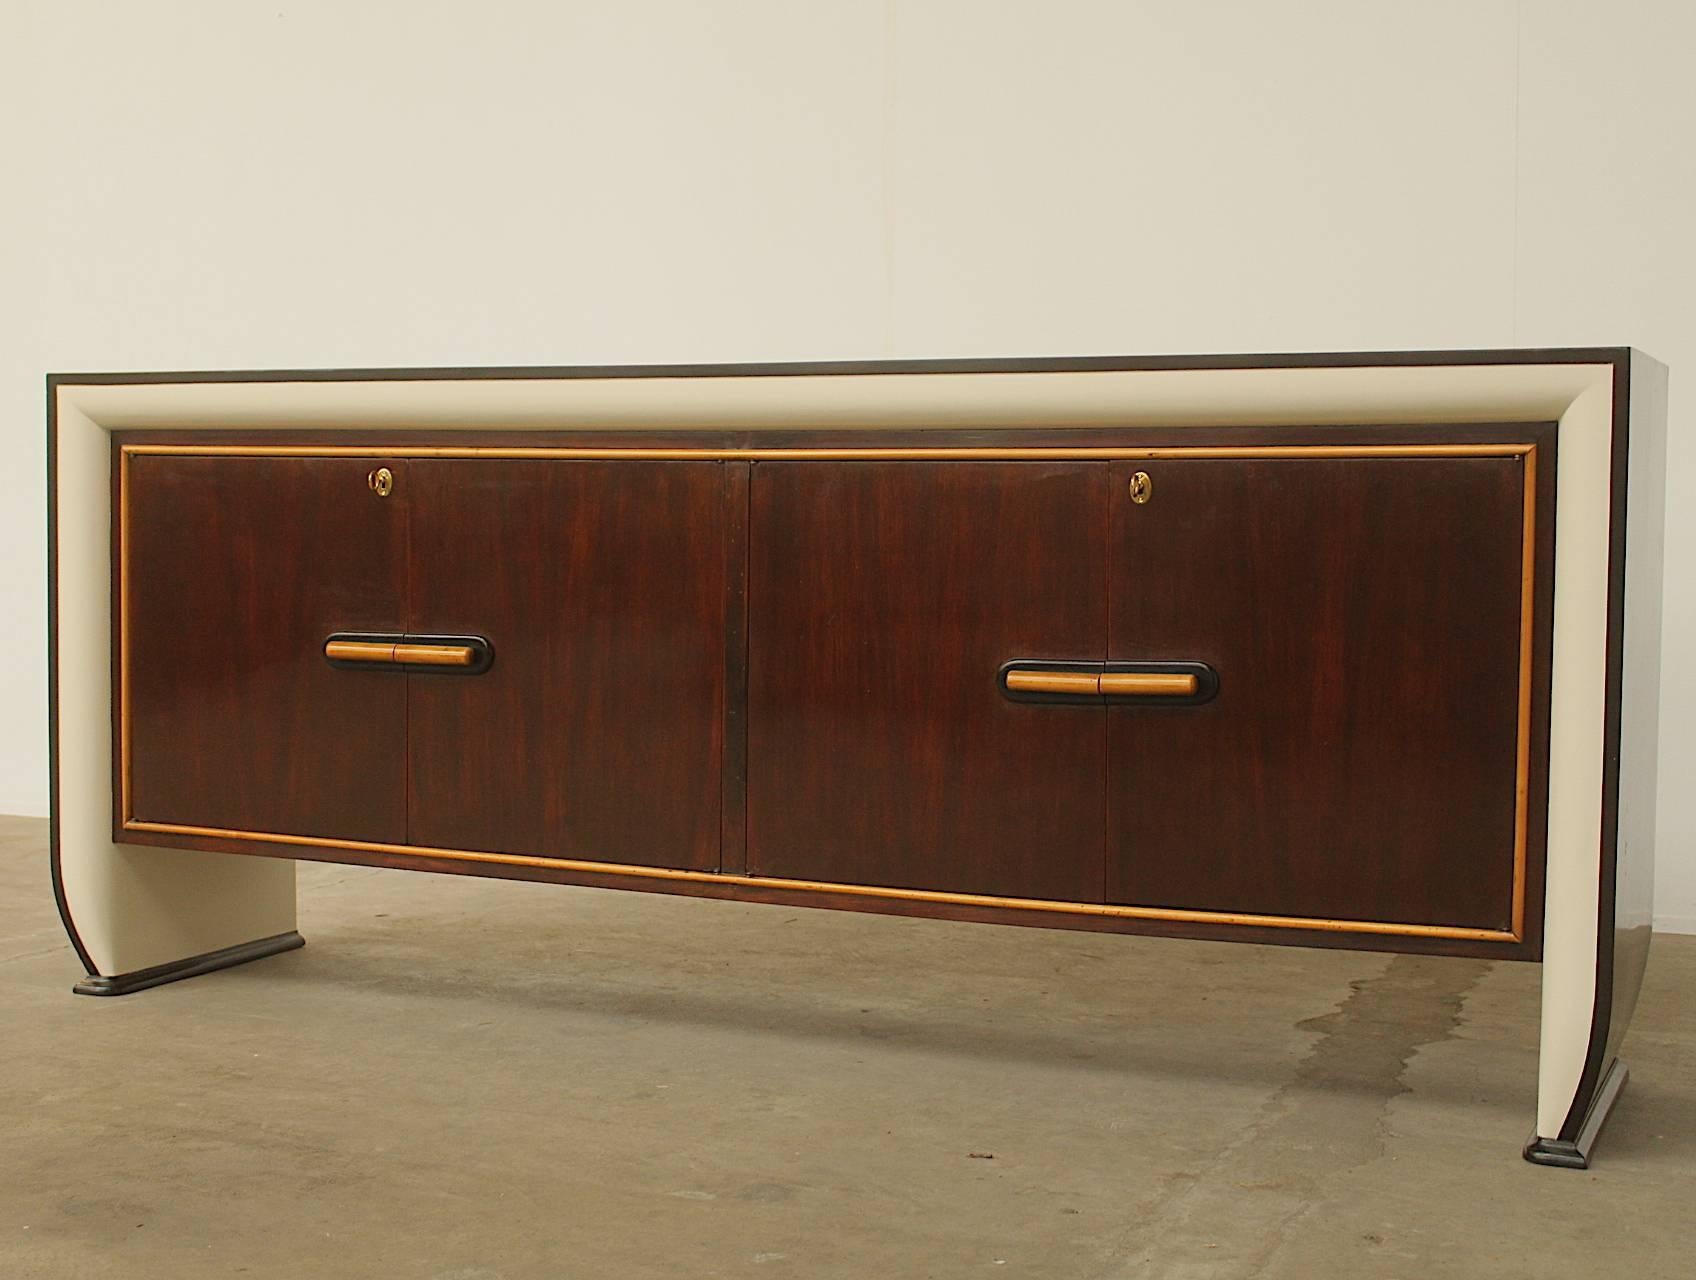 For all items from this dealer please hit the button VIEW ALL FROM SELLER below on this page

Very large sideboard by Italian designer Osvaldo Borsani. The combination of different types of wood create a colorful piece, distinctive for the Borsani